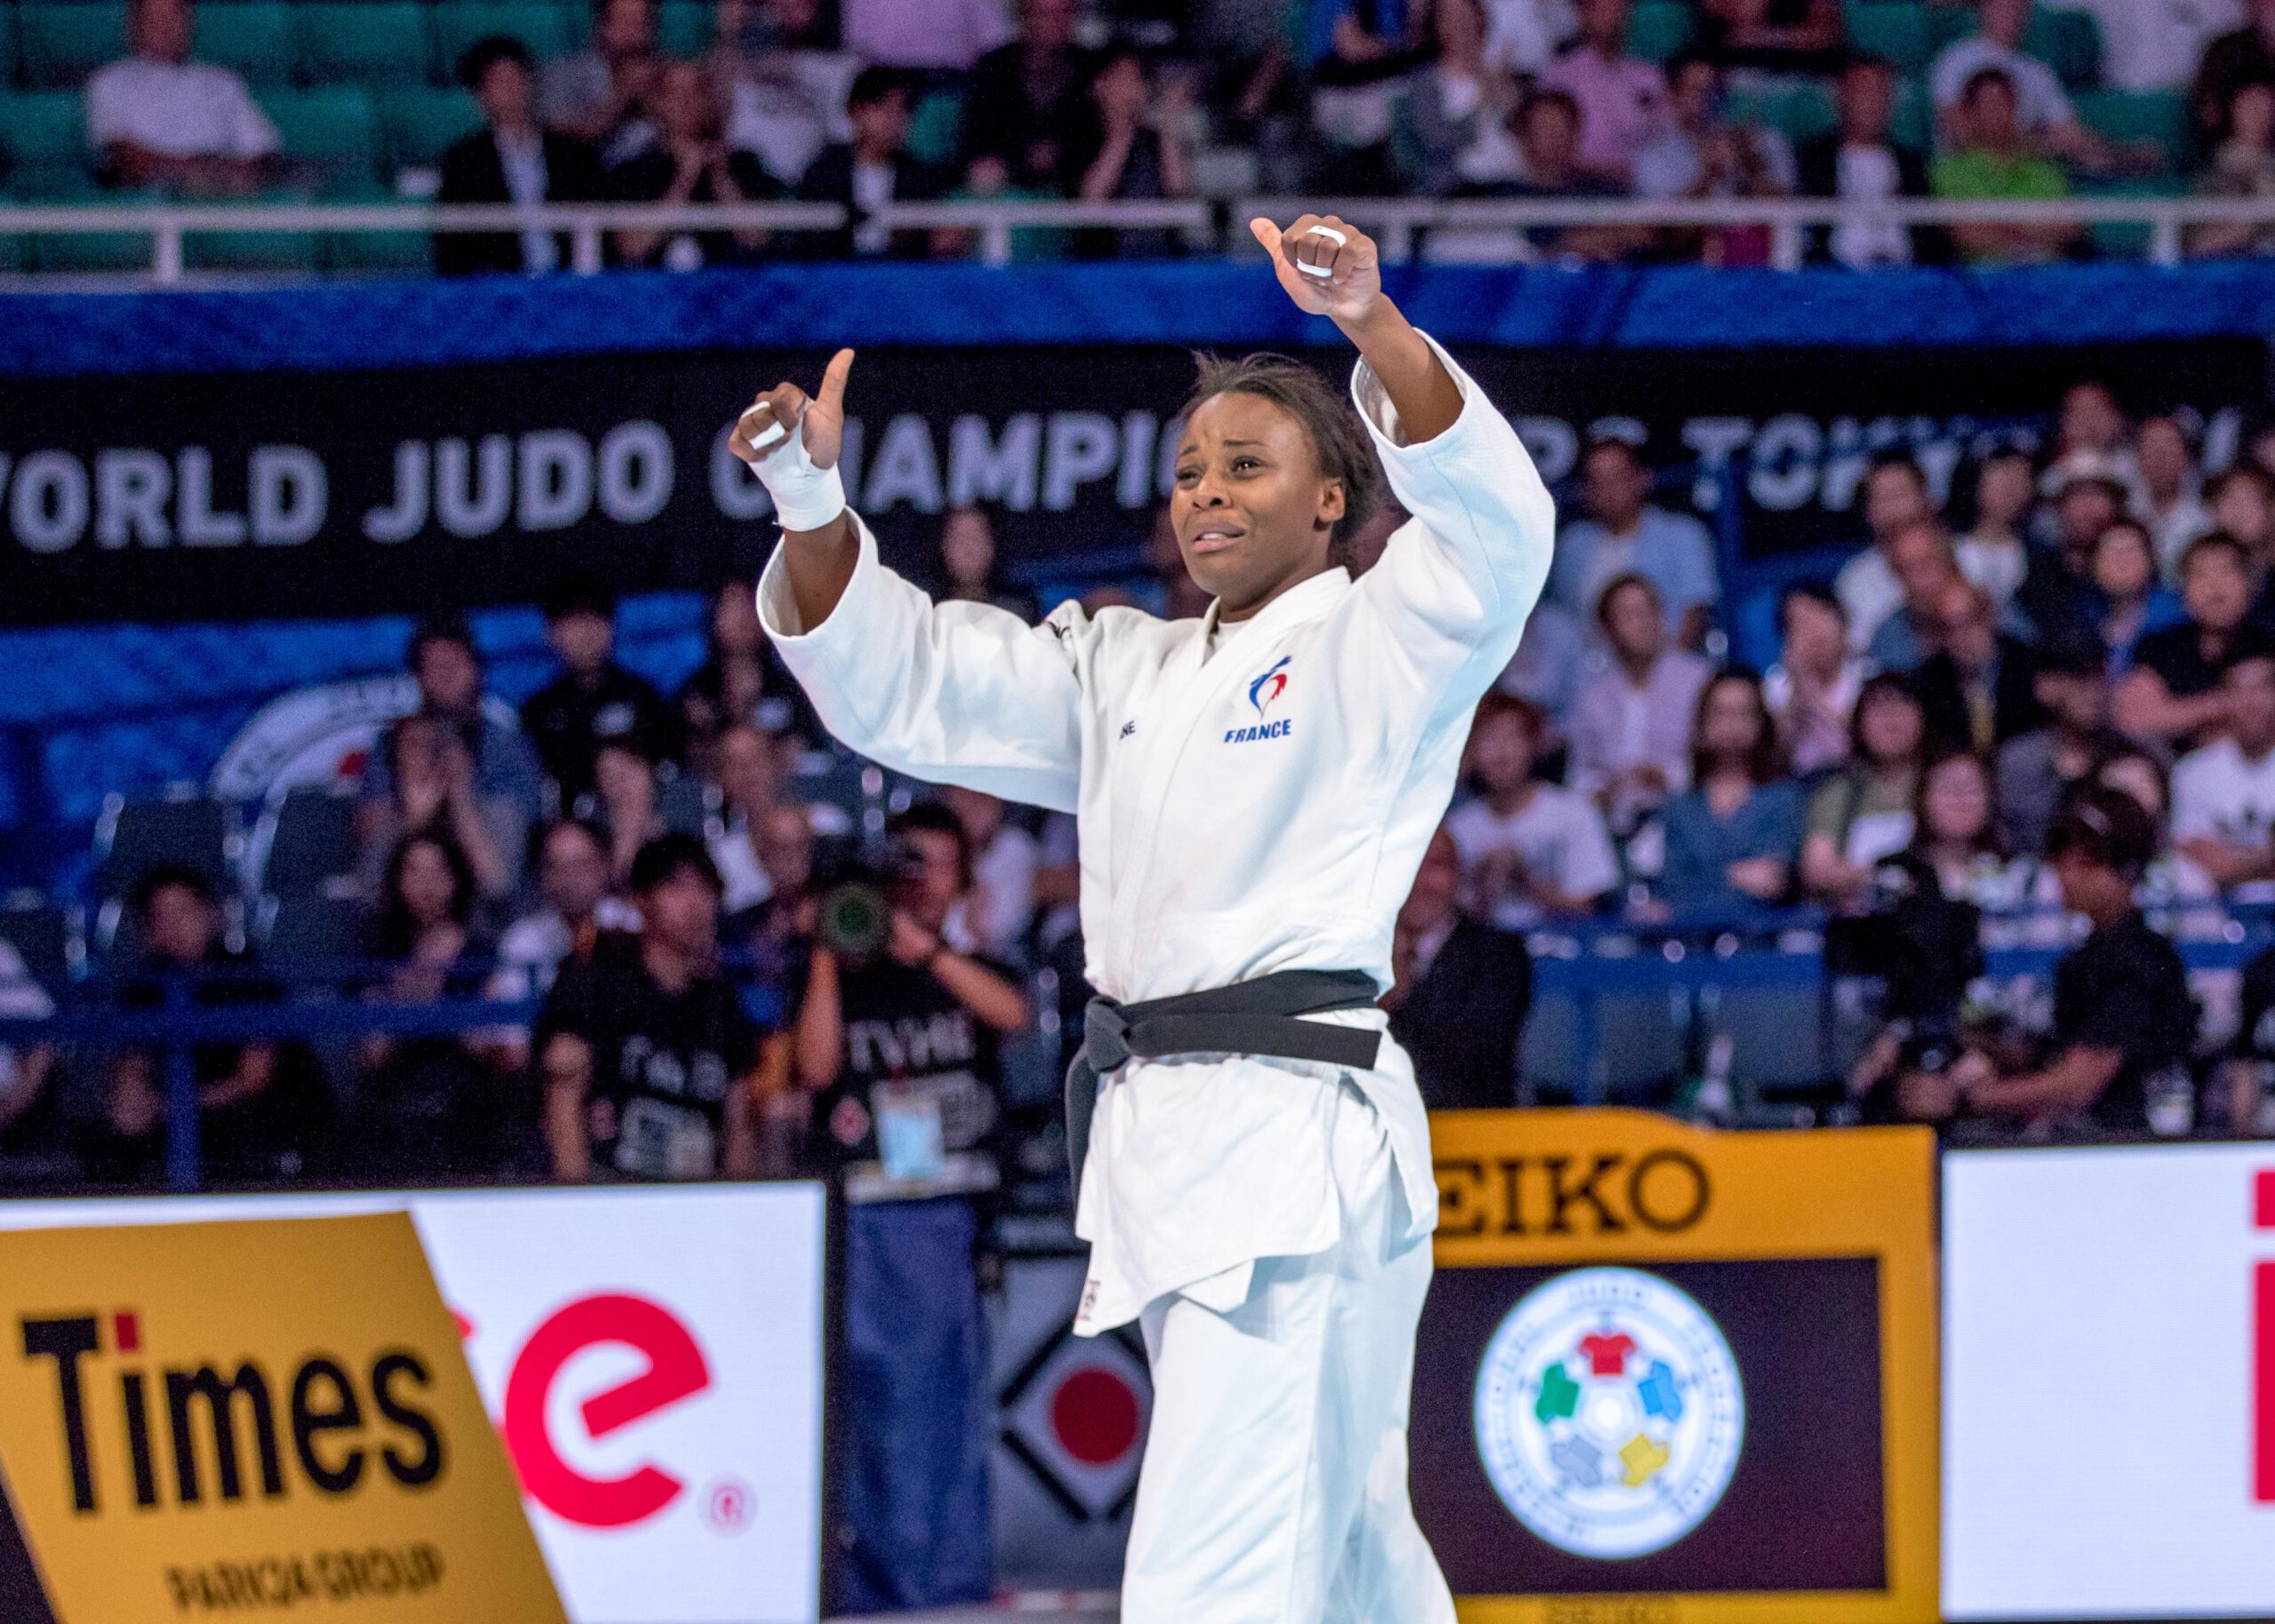 TOP PLAYER: MALONGA SEALS PLACE AT HEAD OF -78KG